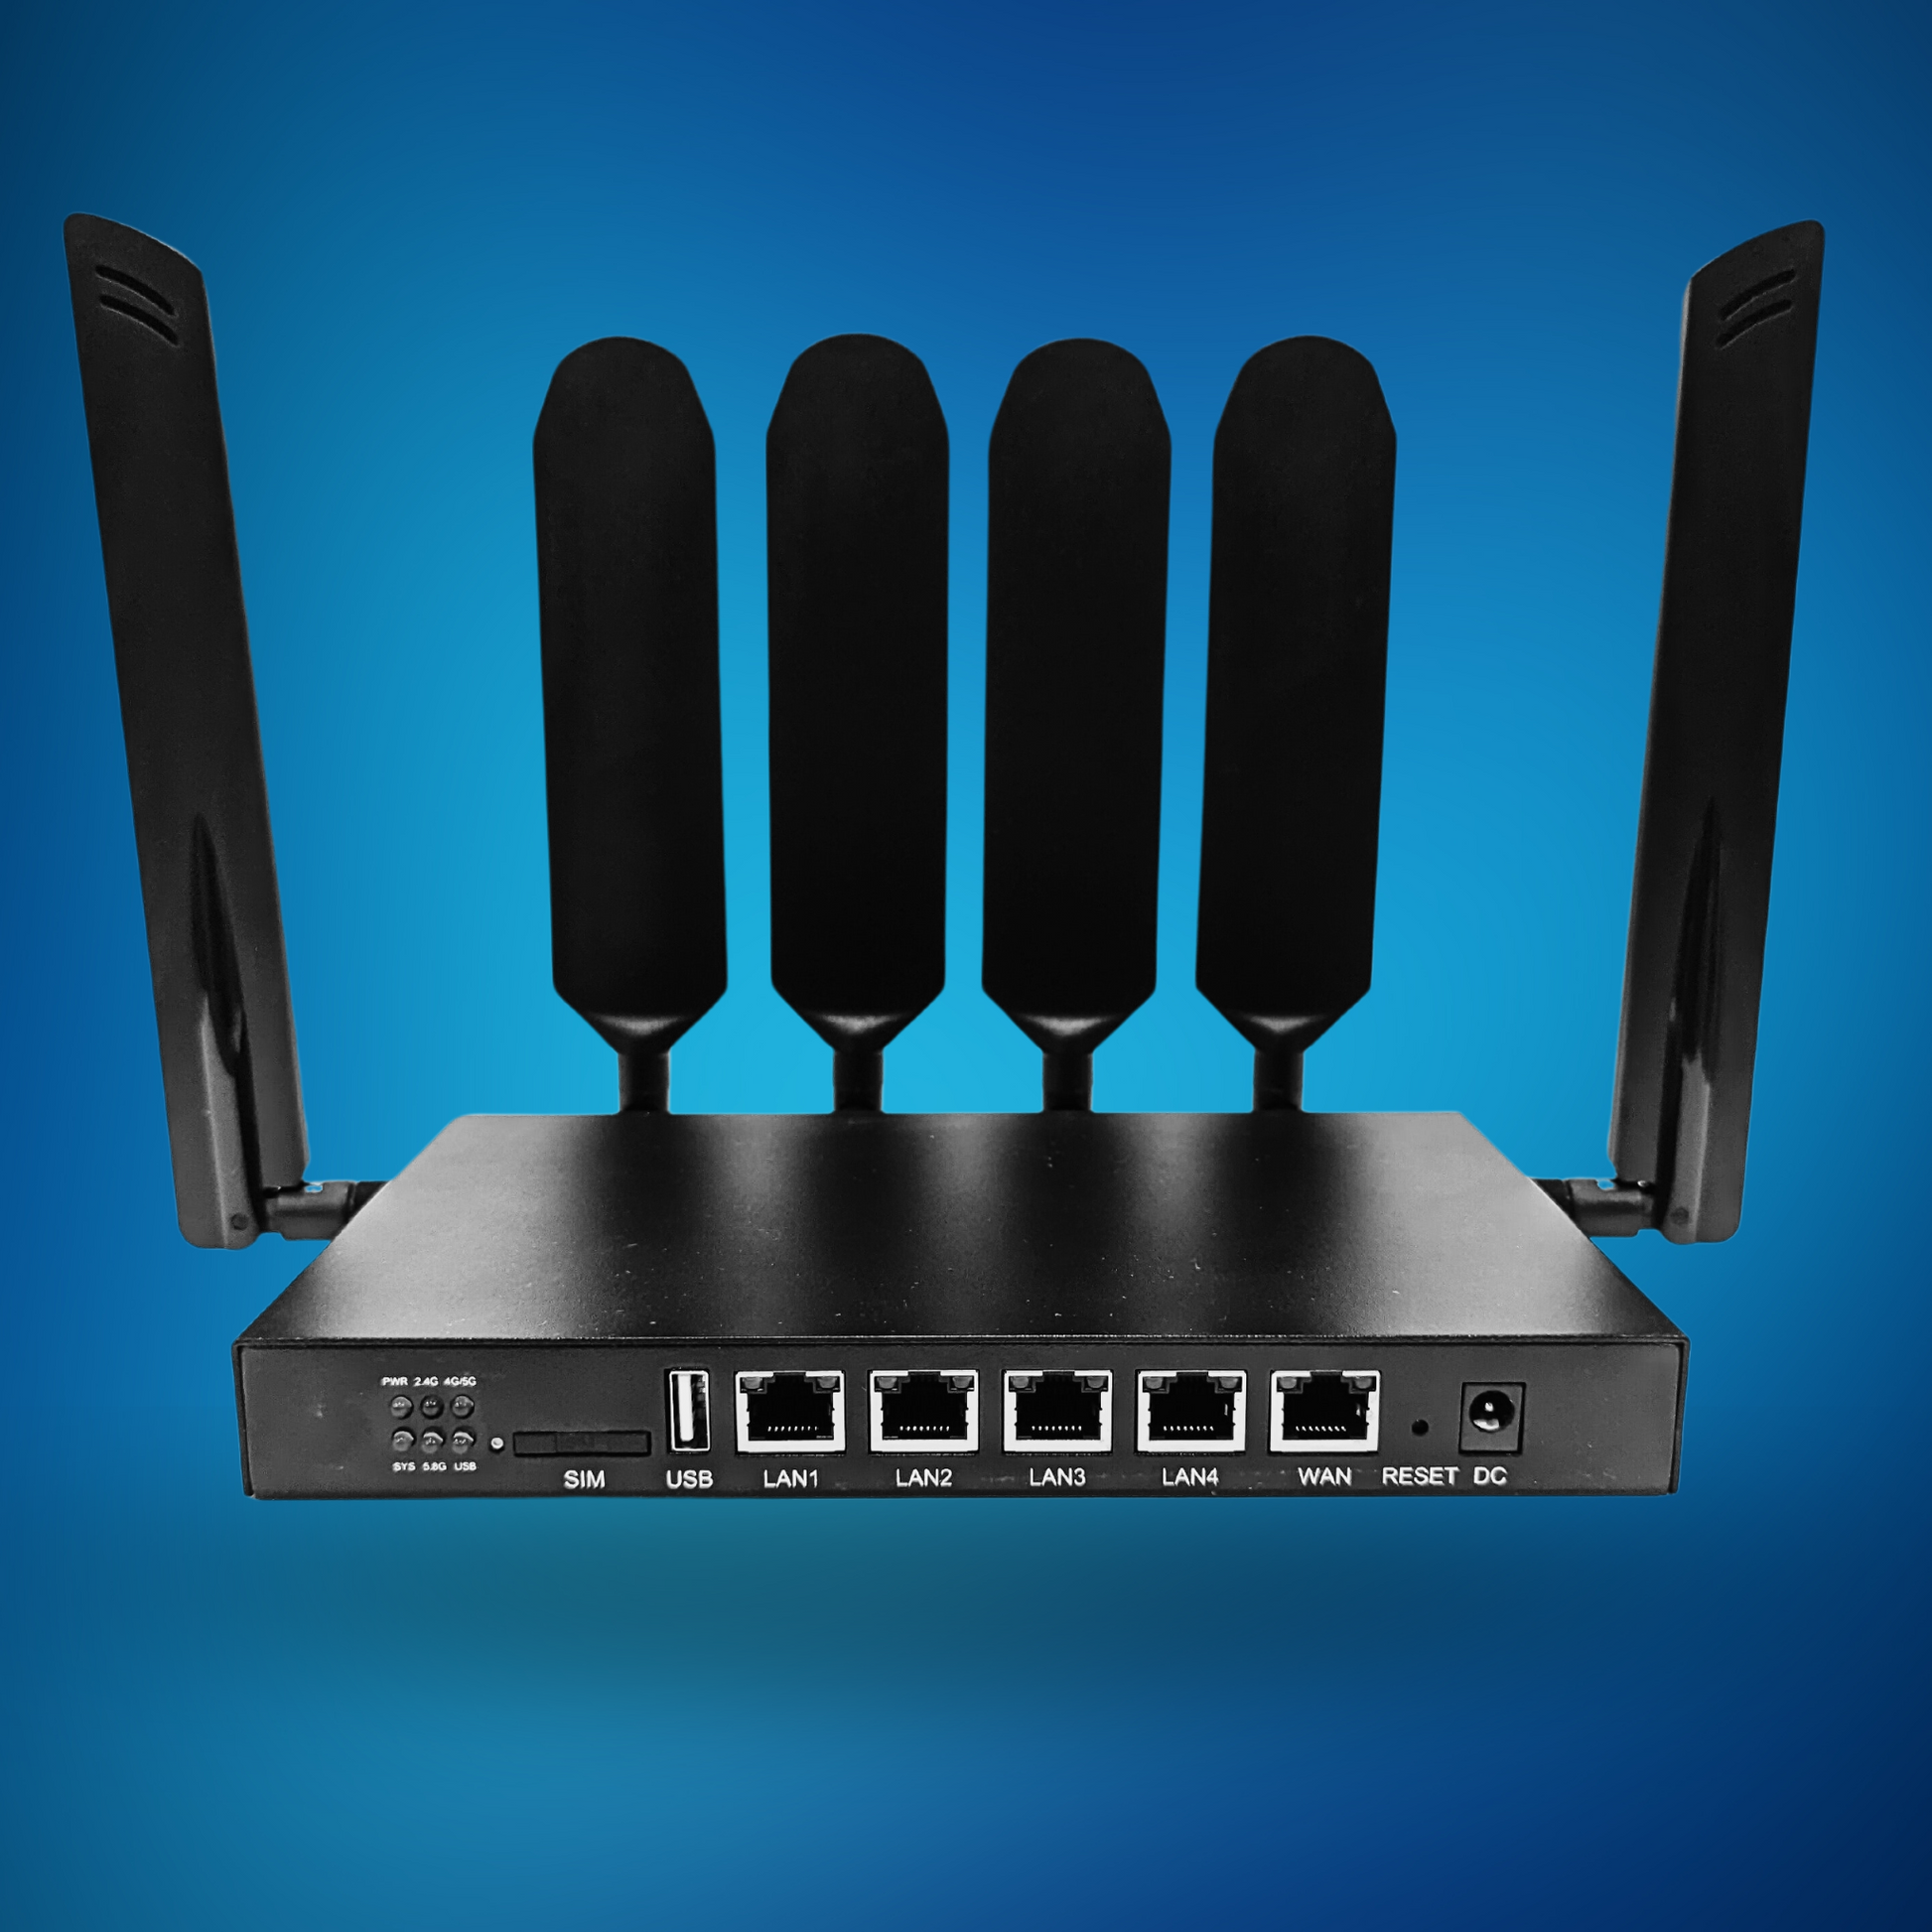 4G/5G LTE Cellular Routers and Gateways